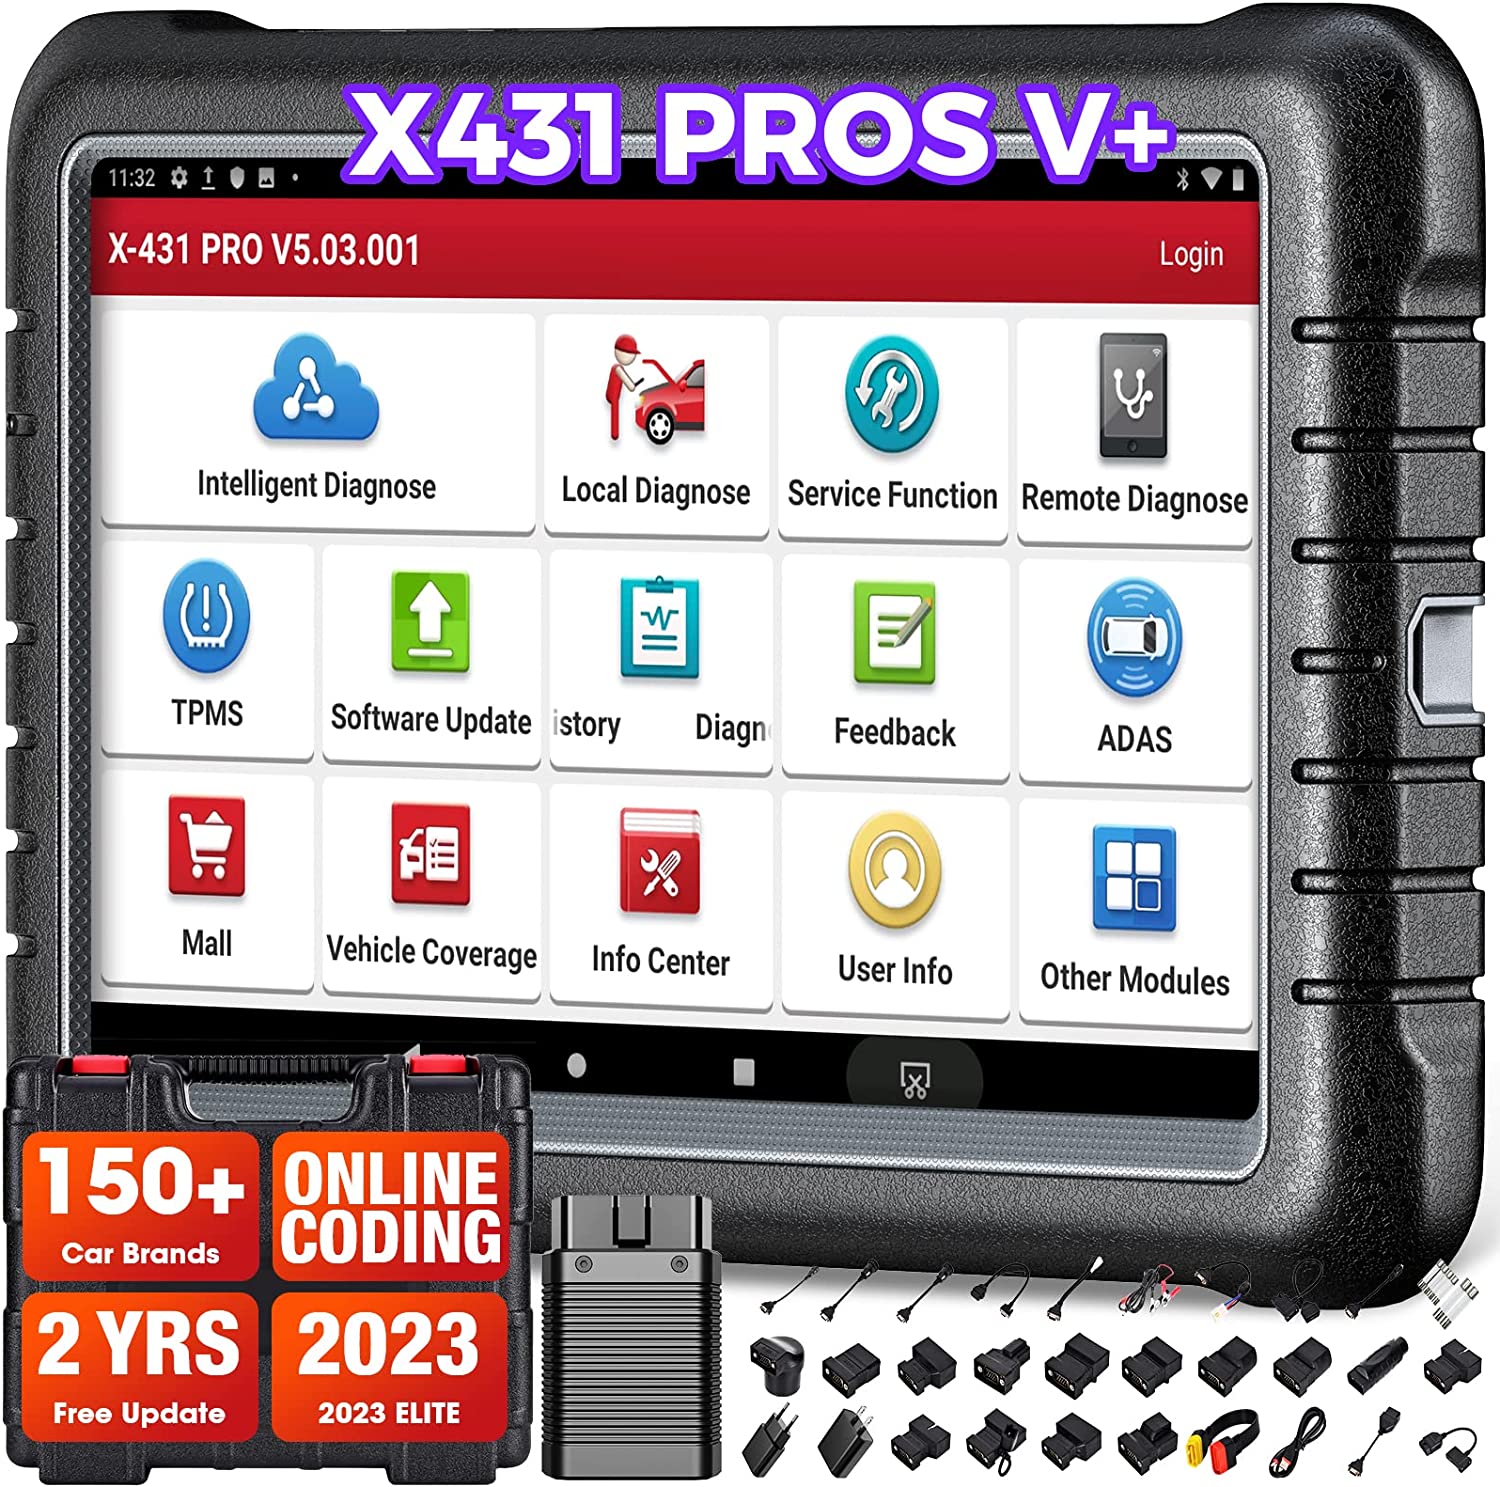 LAUNCH X431 PROS V+ OBD2 Scanner Car Diagnostic Scan Tool, 35+ Services, ECU Coding, AutoAuth for FCA SGW, 2 Years Free Update, Same as X431 V+/ V PRO/Pros V4.0